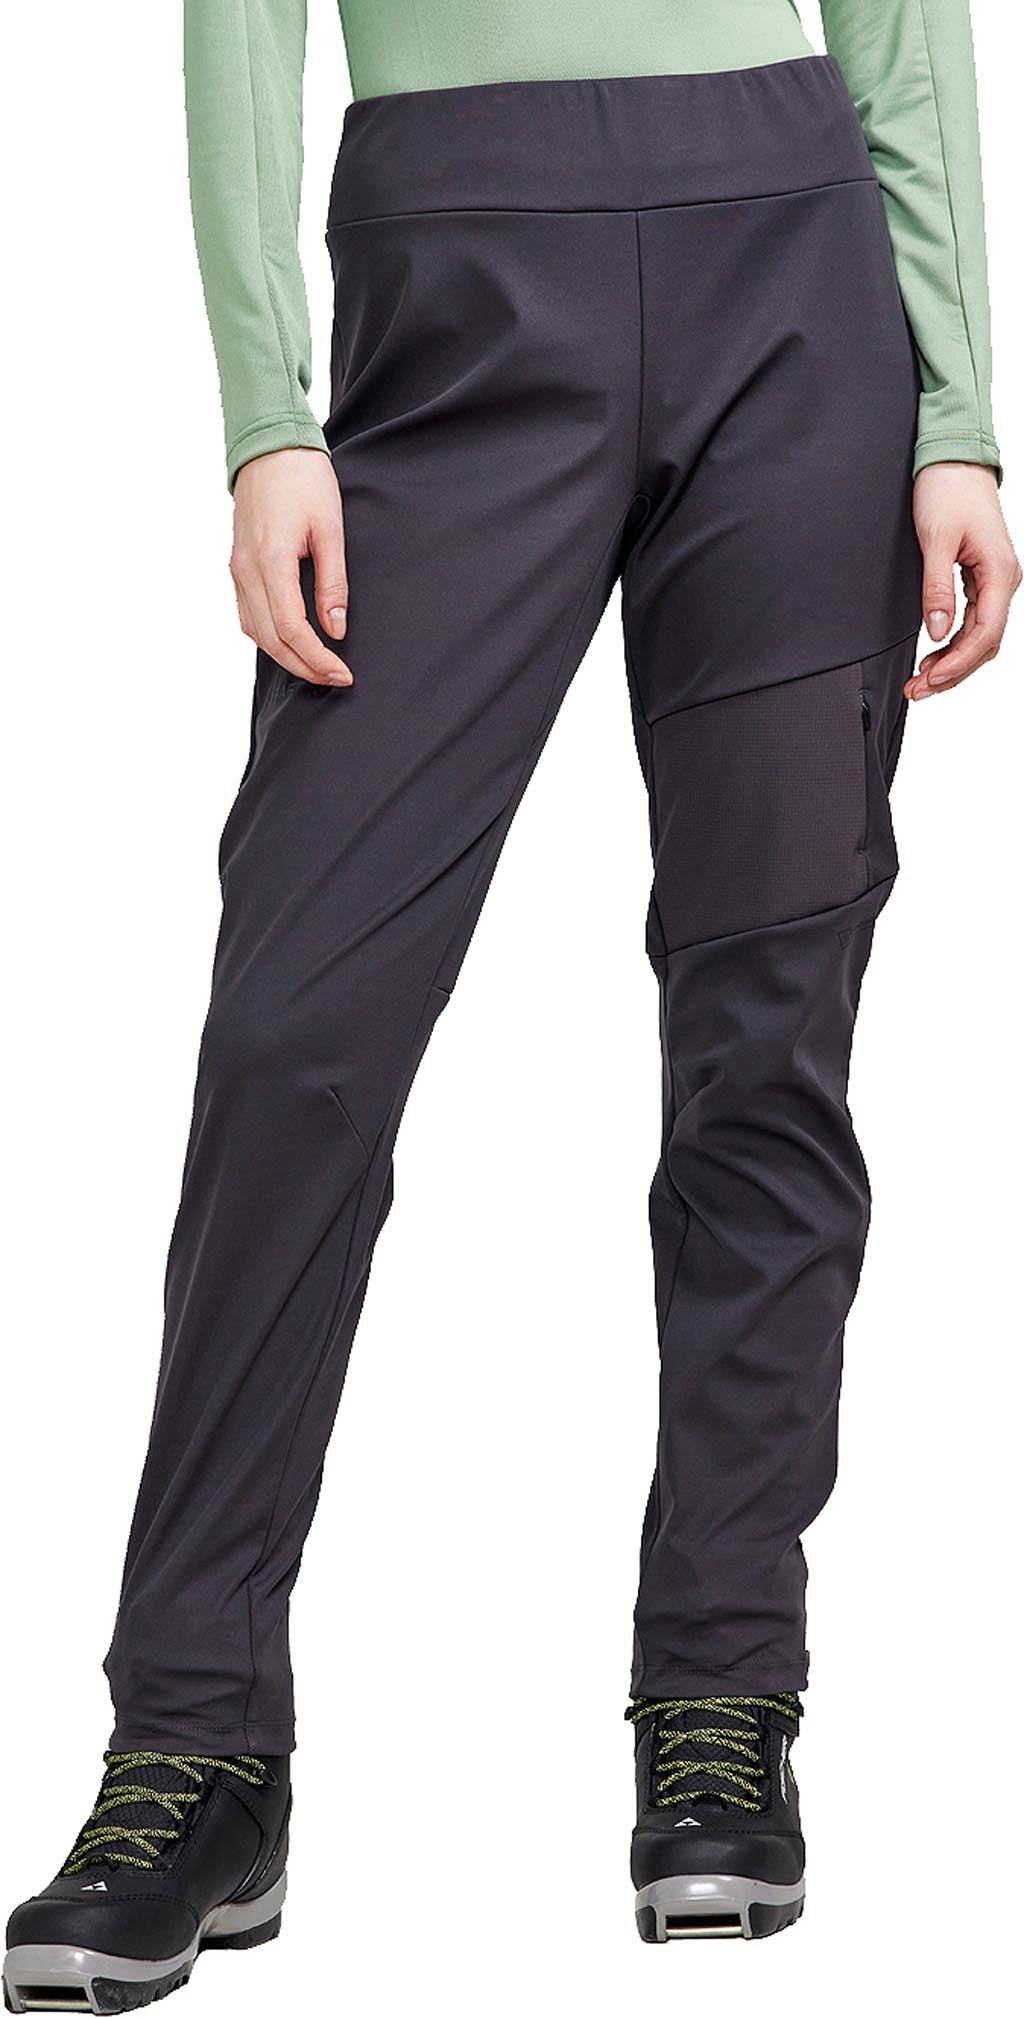 FIRST TACTICAL WOMEN'S SPECIALIST TACTICAL PANTS REVIEW! - Femme